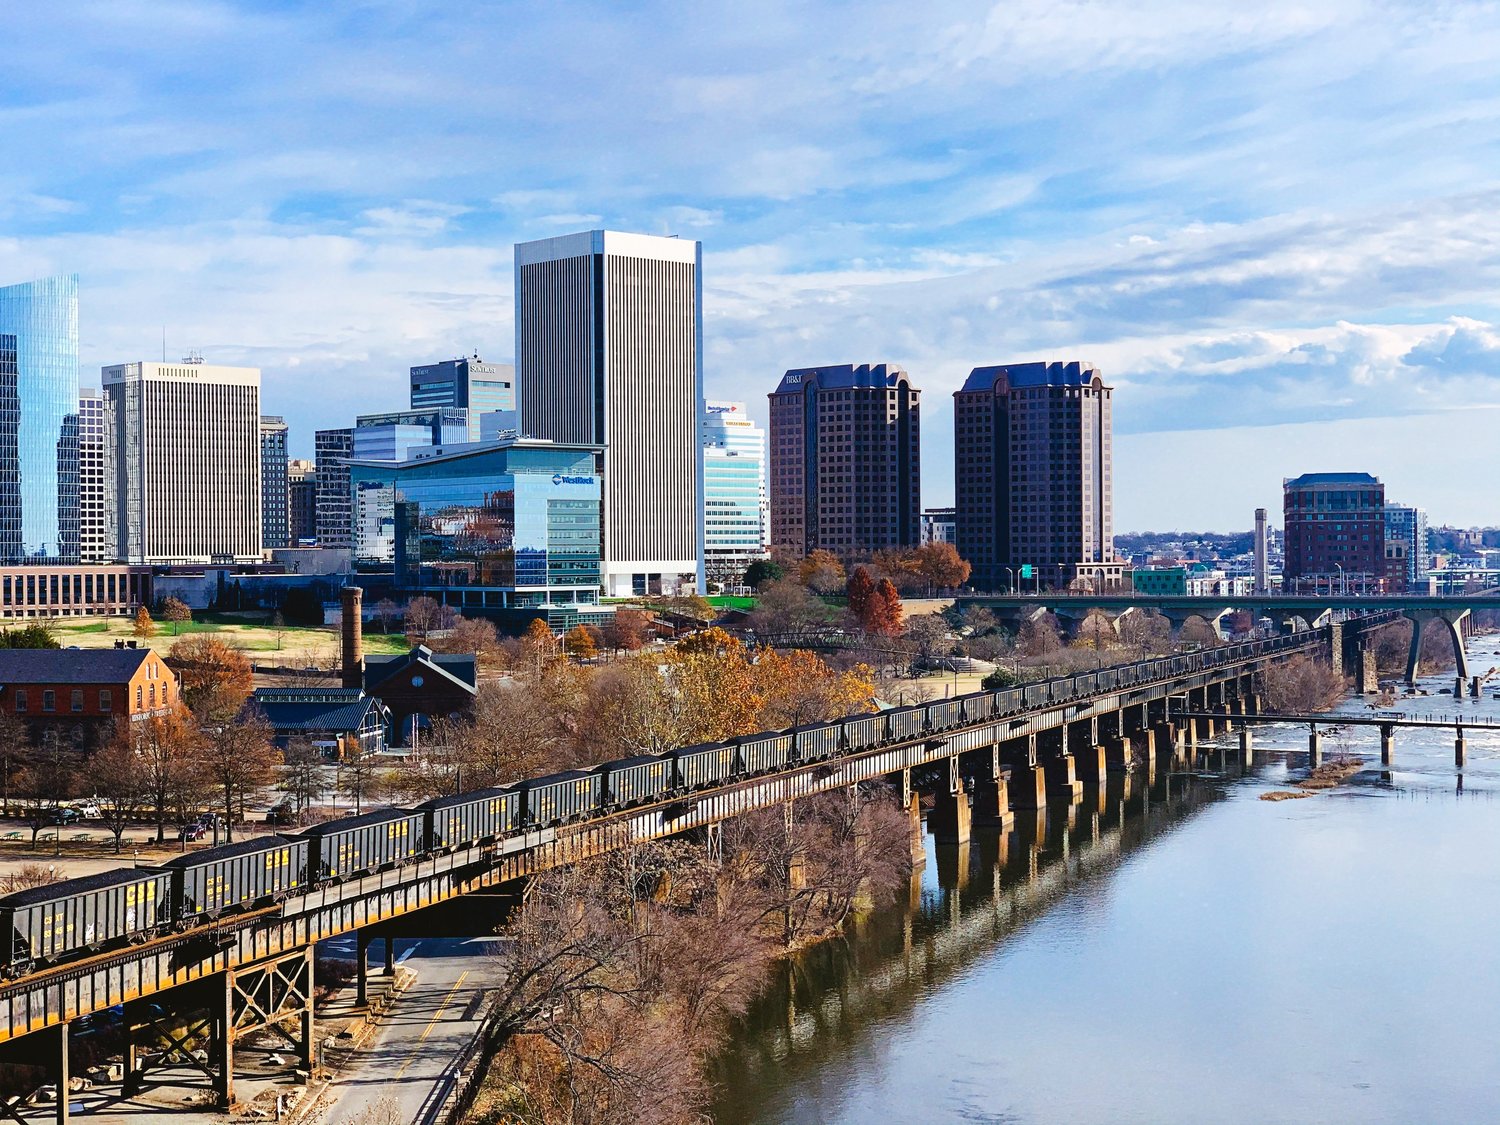 City/River view of Richmond, Virginia, commercial district.